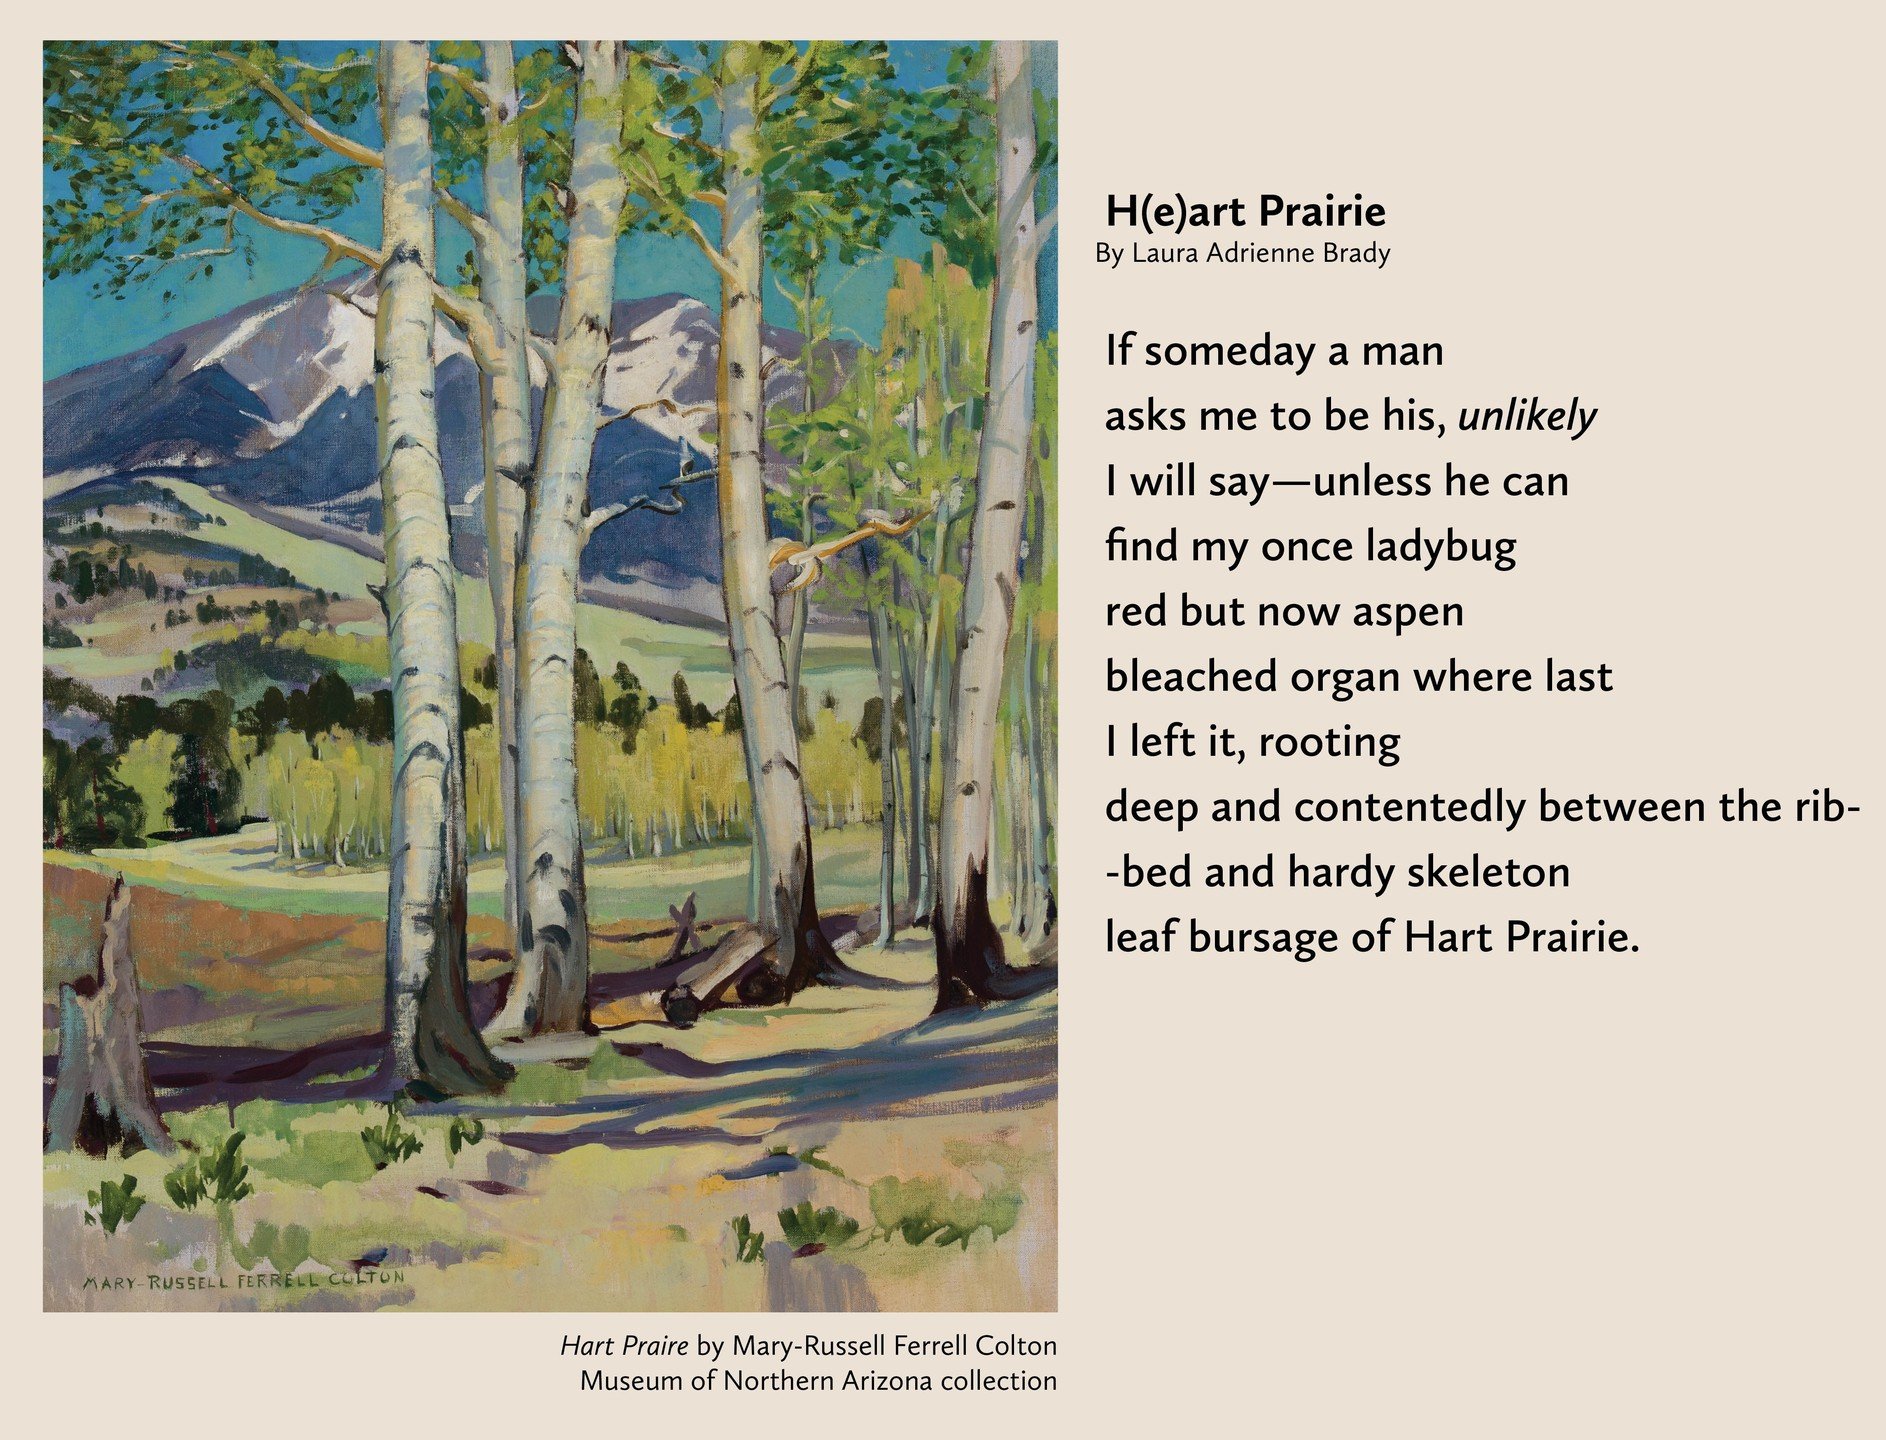 I&rsquo;m so excited to have my poem featured in the Poetry Maps project as part of ARTx: Art + Ideas Experience Arizona this year! 

This is such a wonderful project that pairs paintings of Northern Arizona with poems written in response. The Poetry